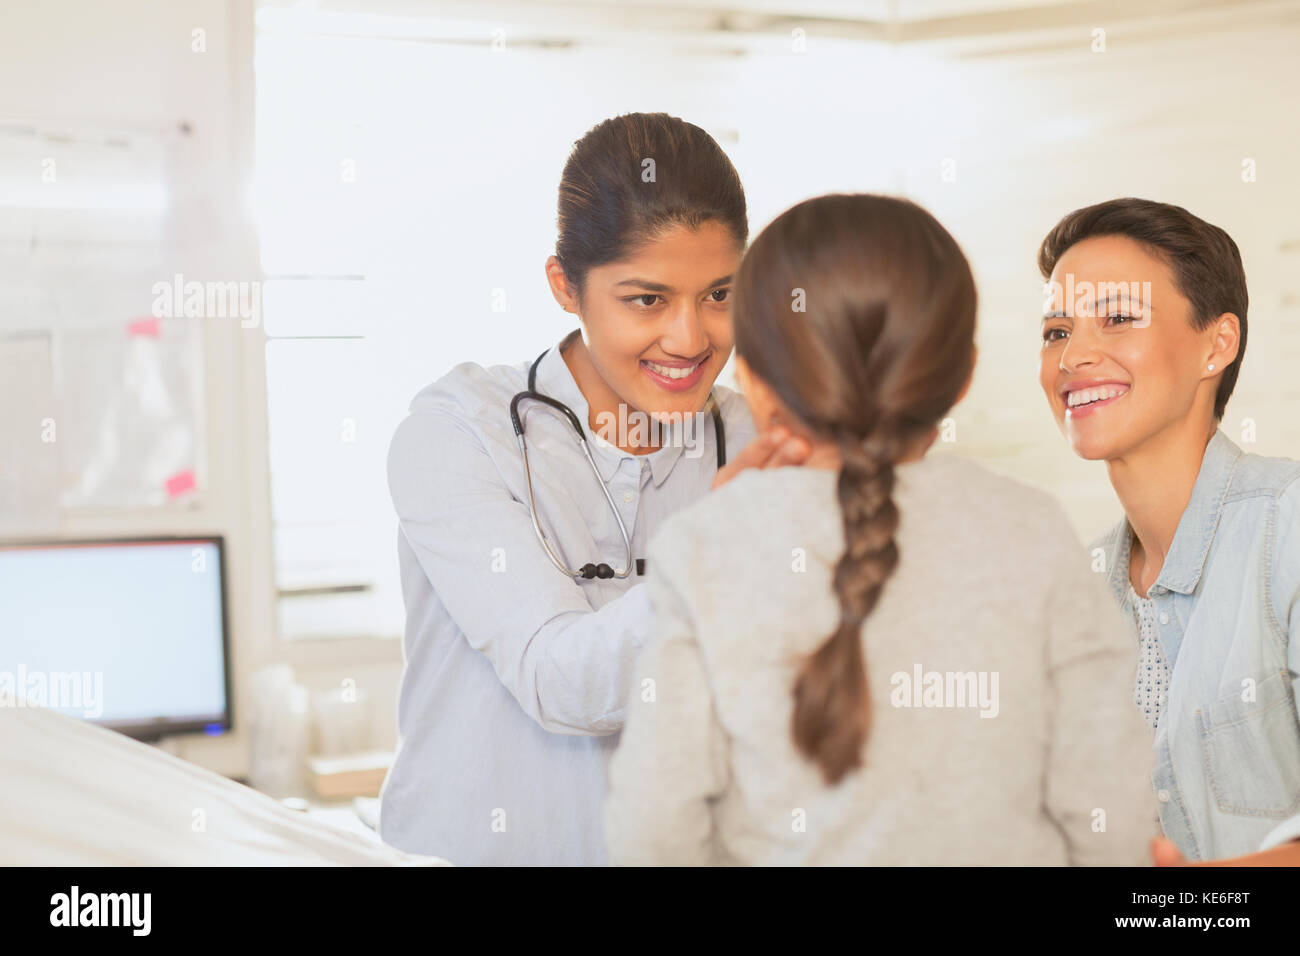 Female pediatrician checking neck lymph node glands of girl patient in examination room Stock Photo